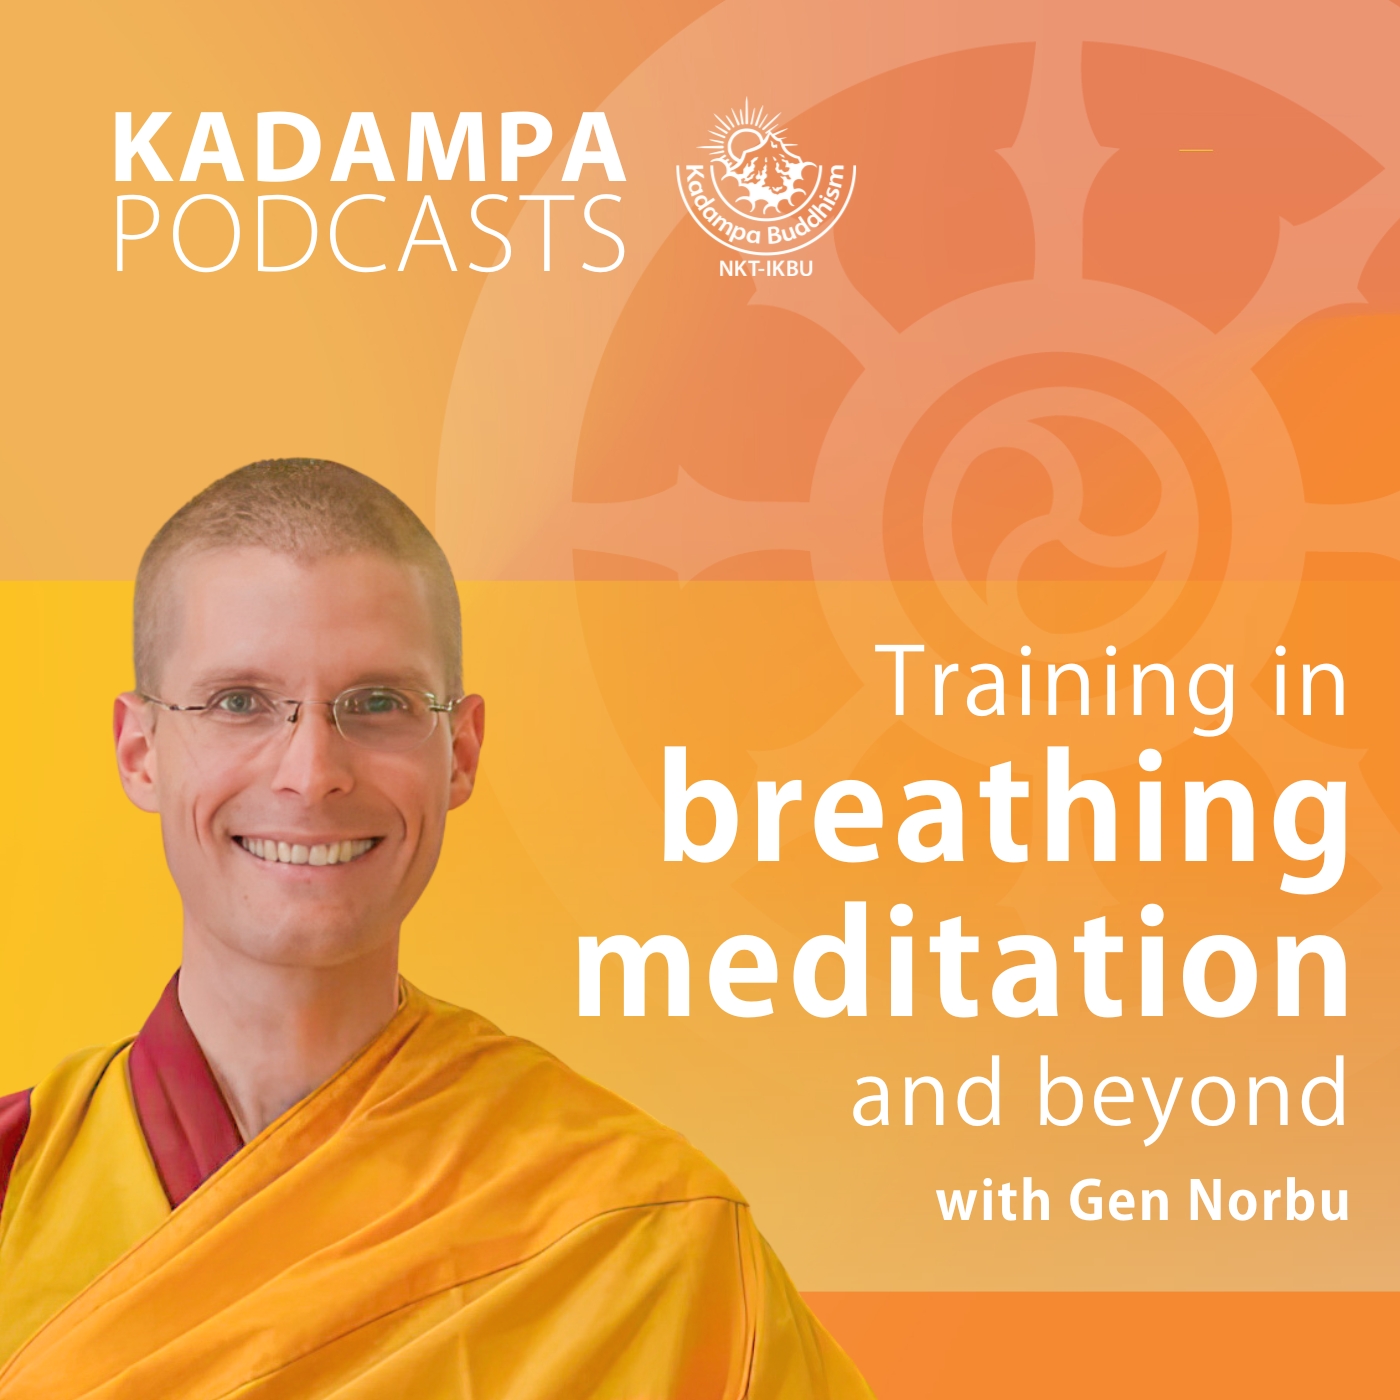 Training in breathing meditation and beyond